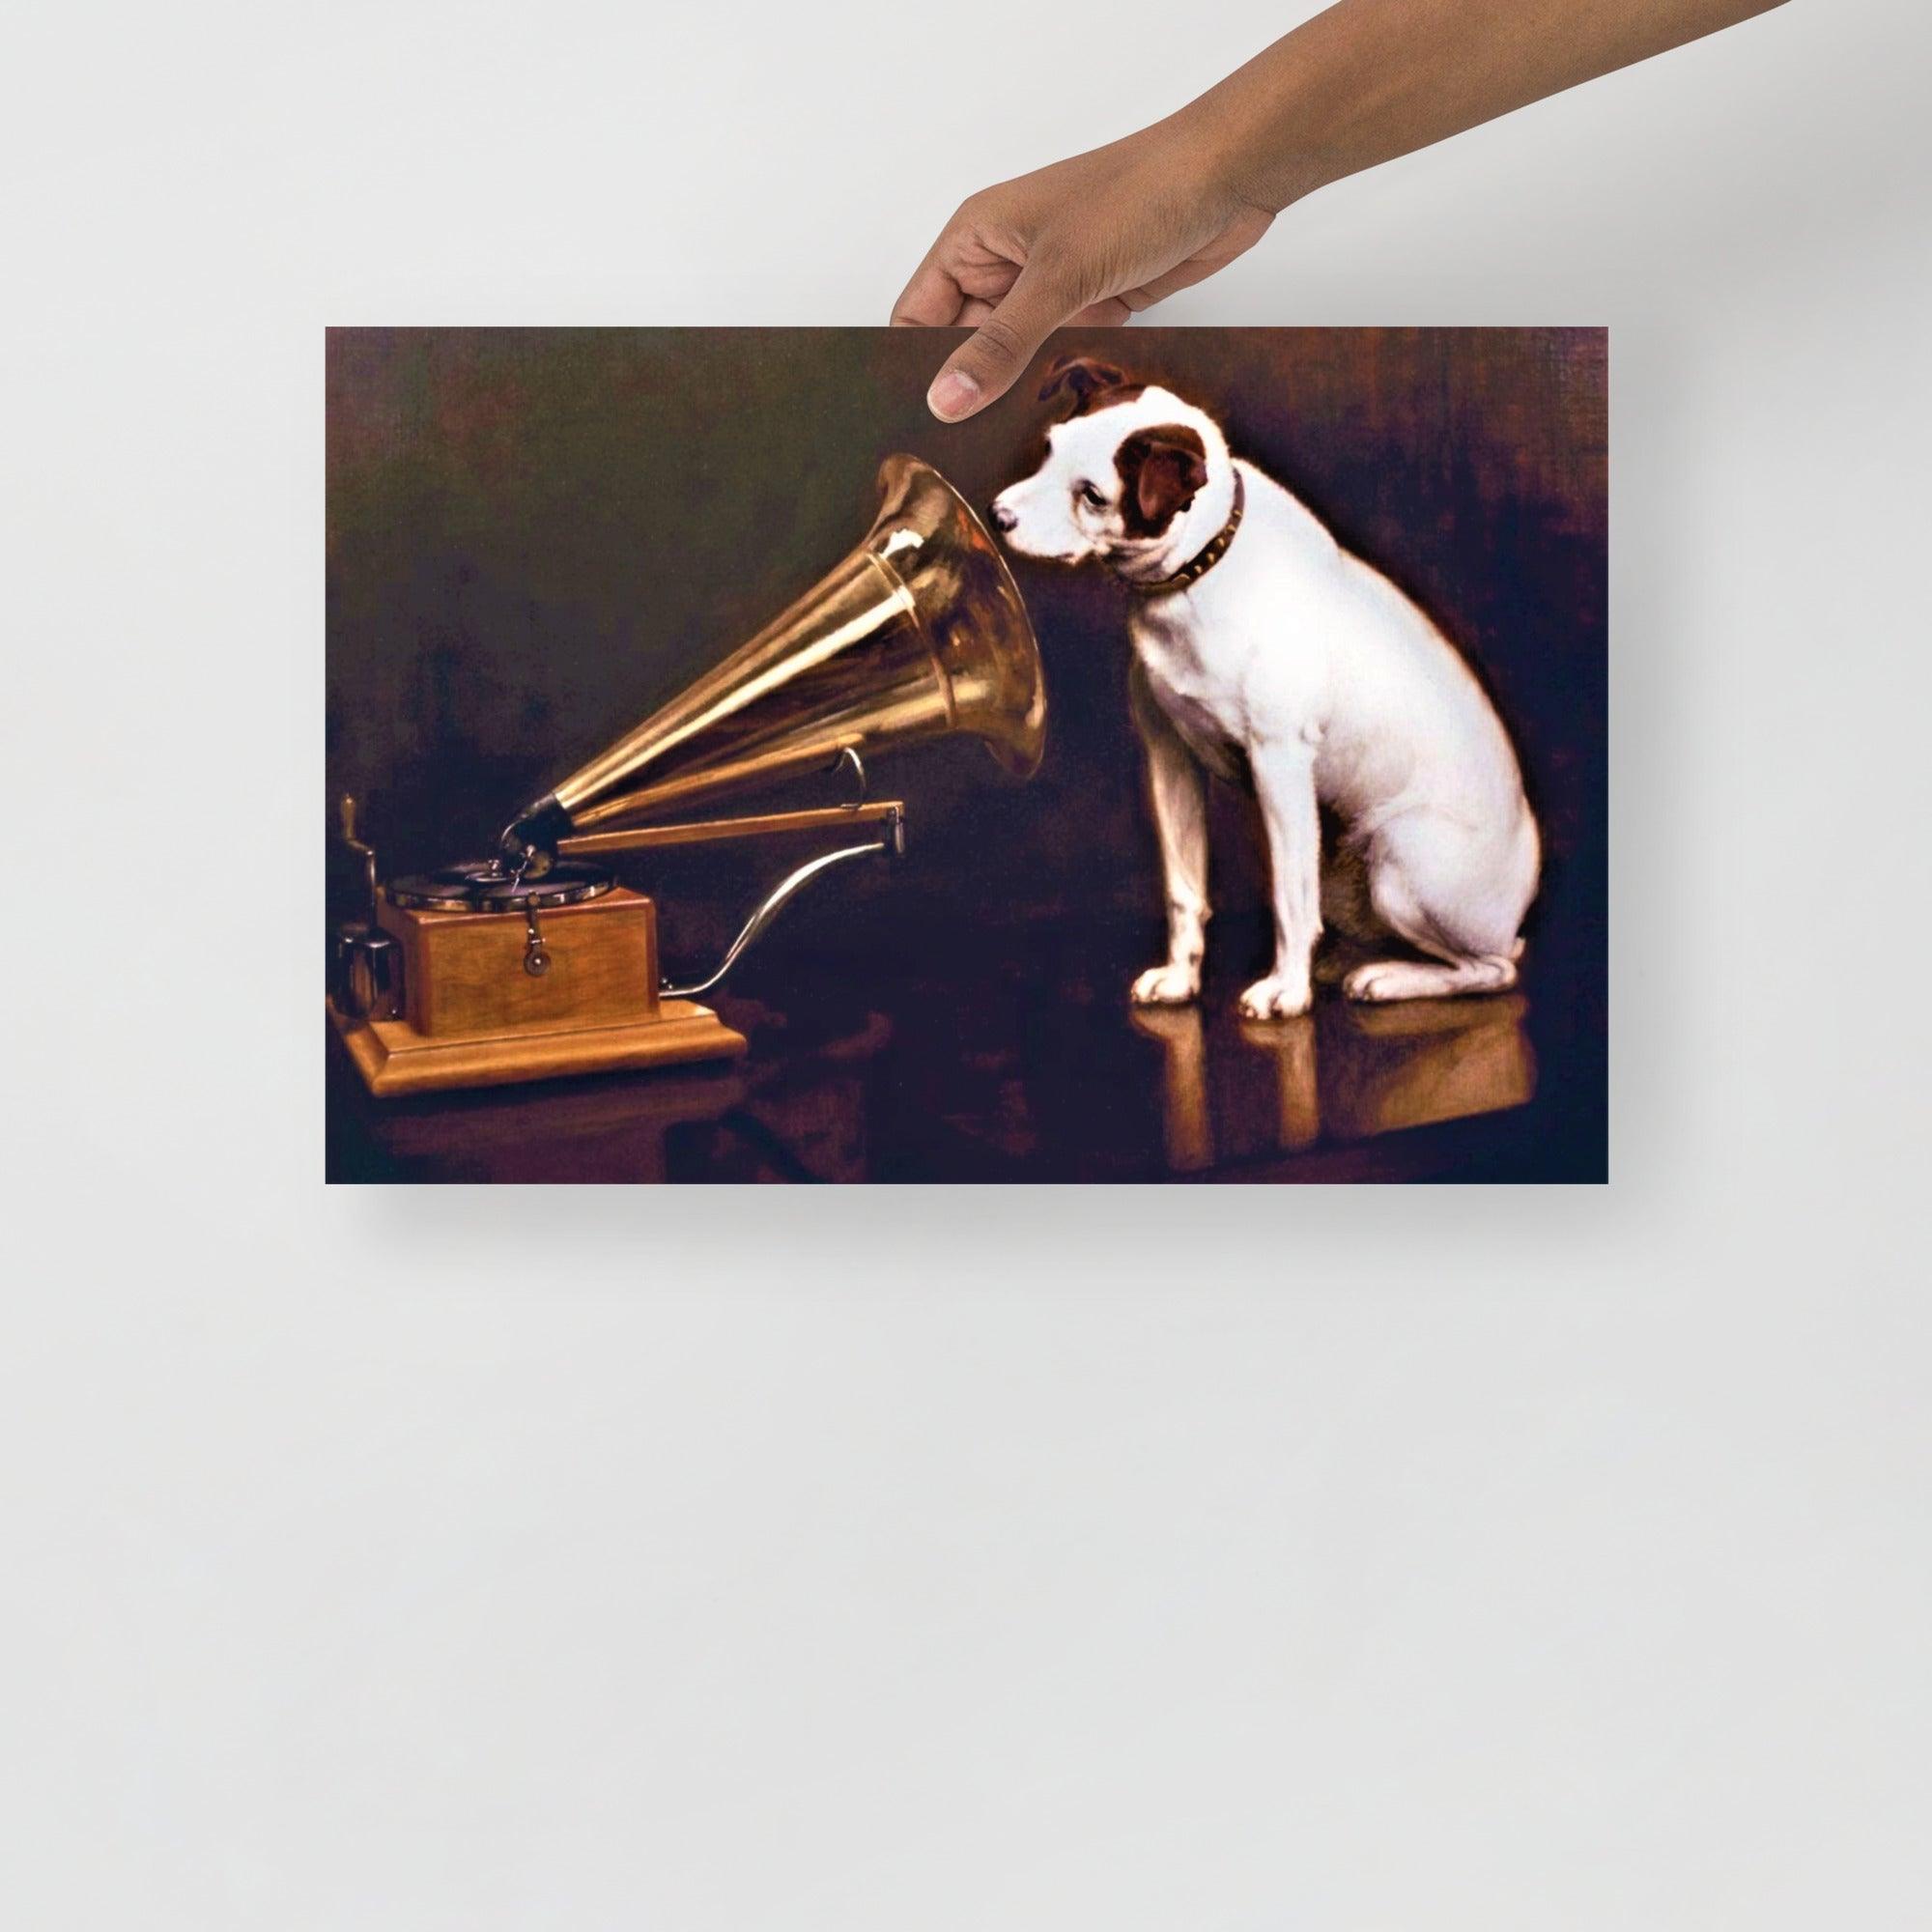 A His Master's Voice By Francis Barraud poster on a plain backdrop in size 12x18”.